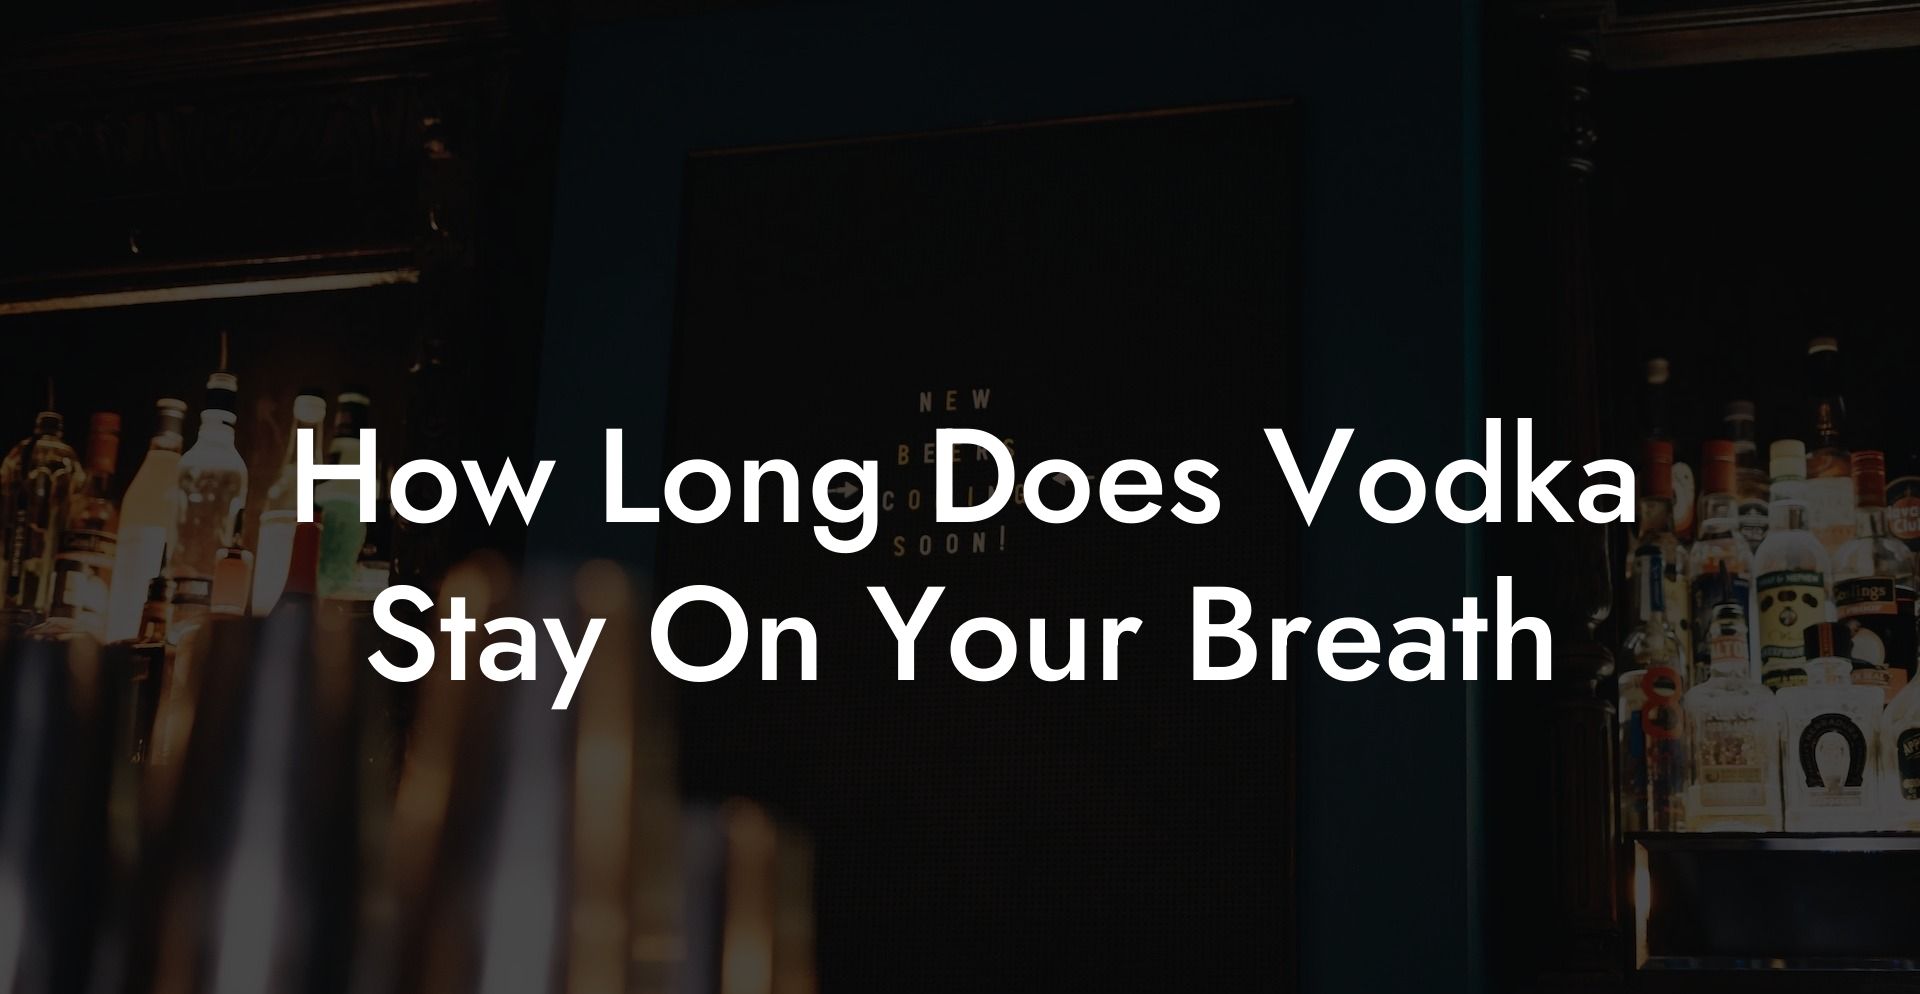 How Long Does Vodka Stay On Your Breath